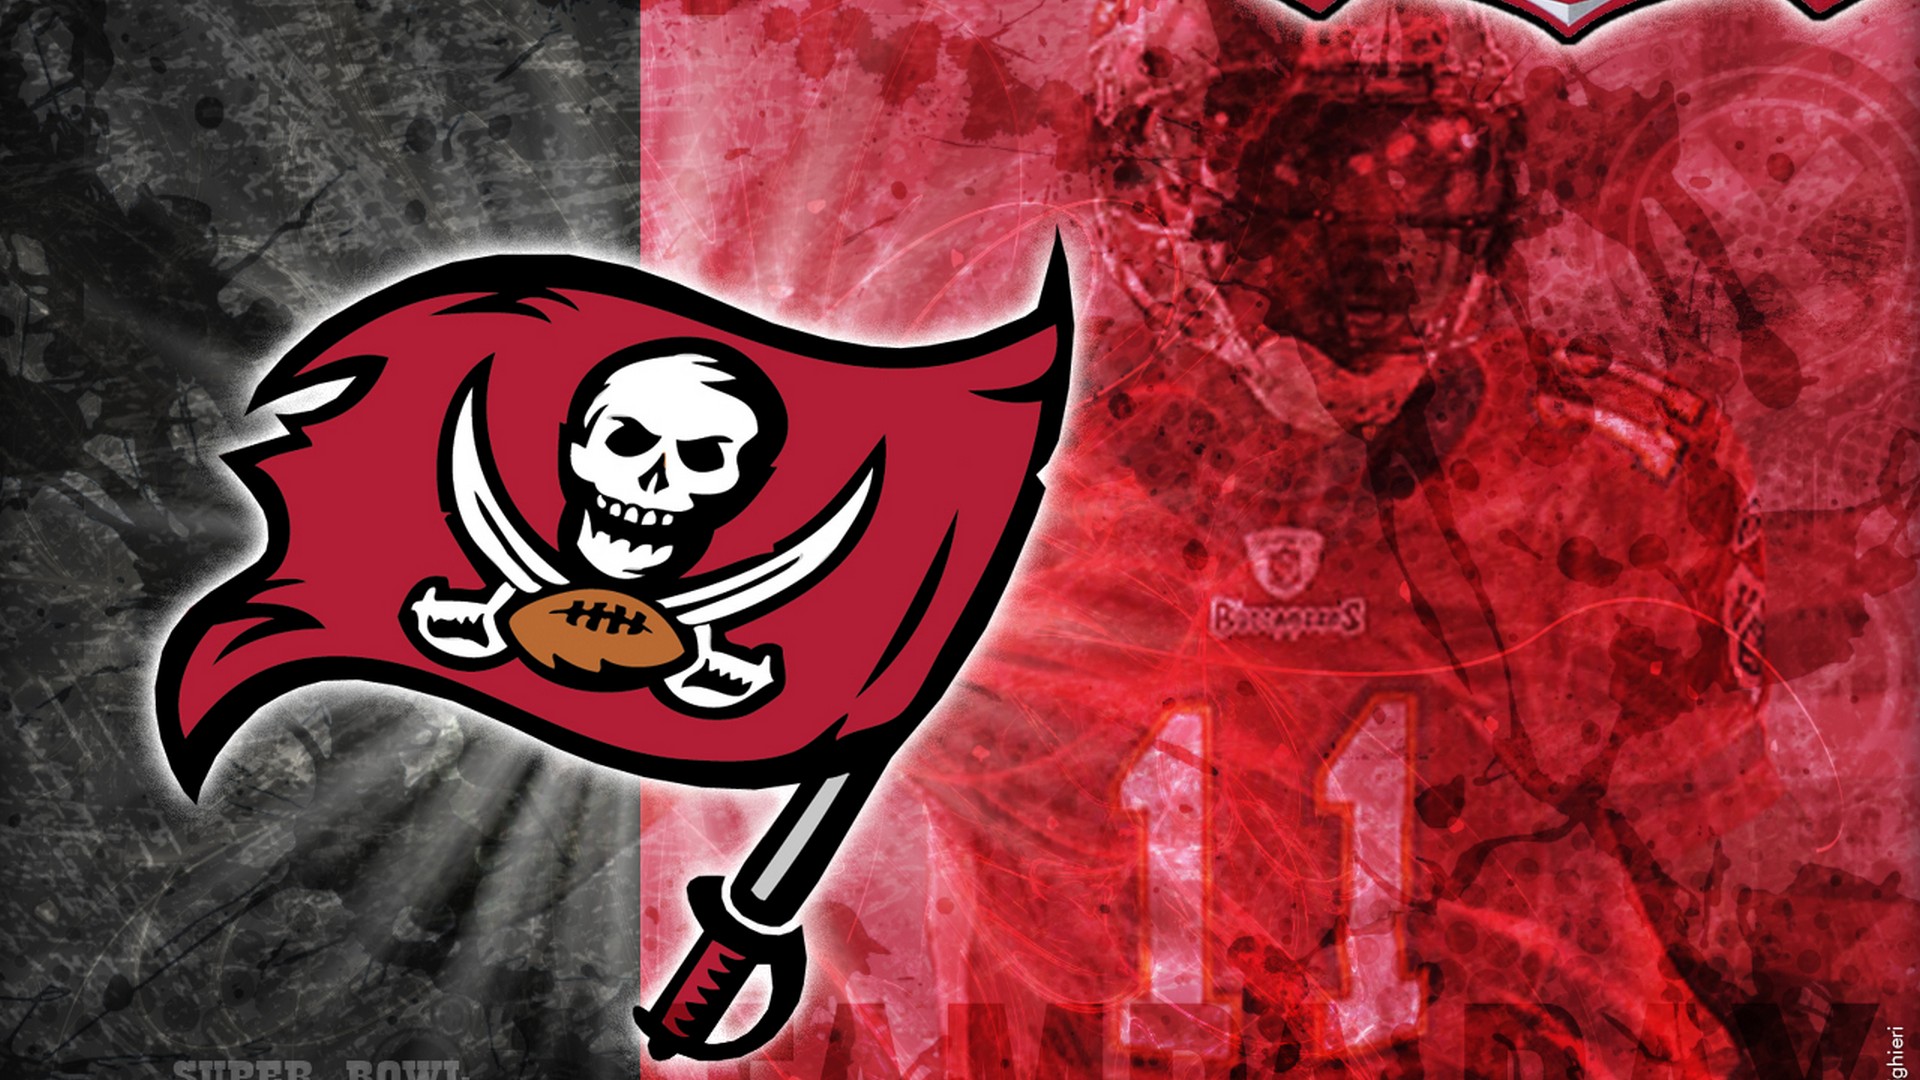 Tampa Bay Buccaneers Backgrounds HD | 2020 NFL Football Wallpapers